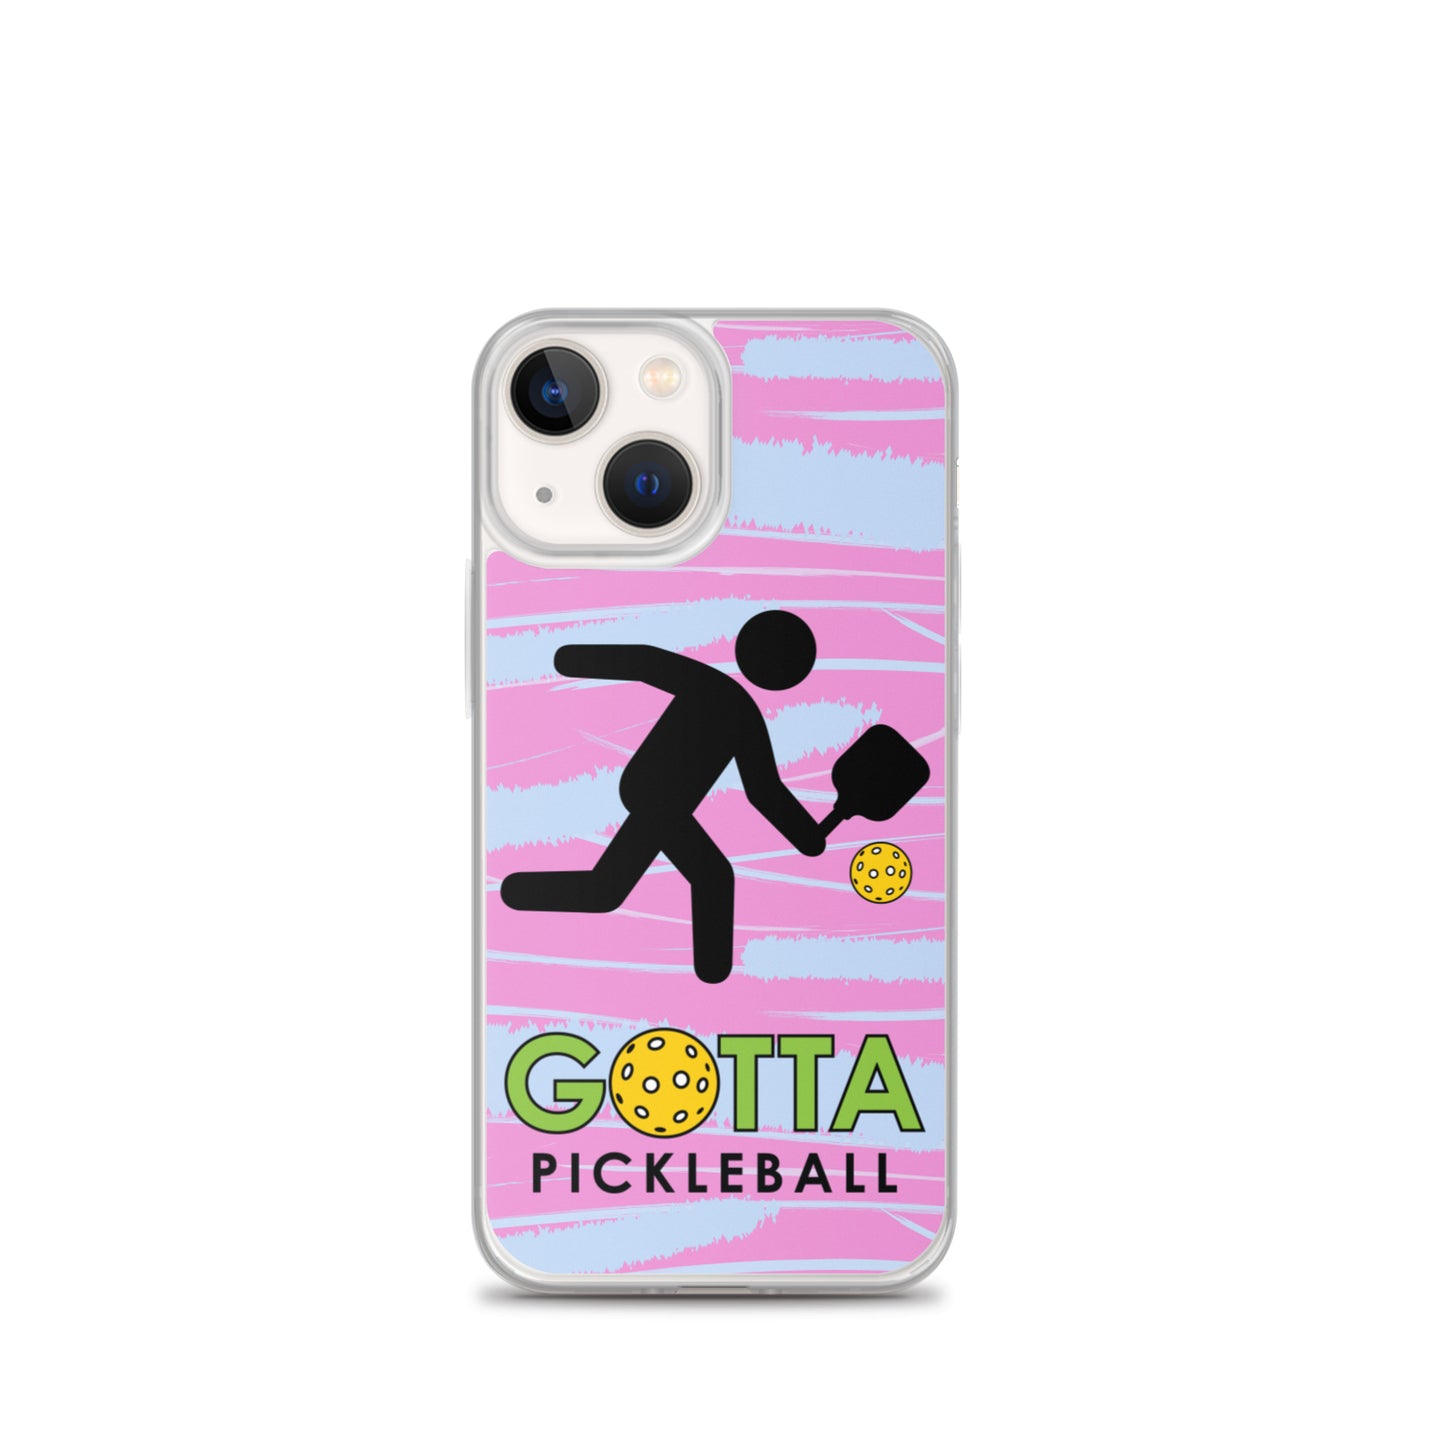 iPhone Case: GOTTA PICKLEBALL WITH OUR MASCOT OZZIE PINK & BLUE